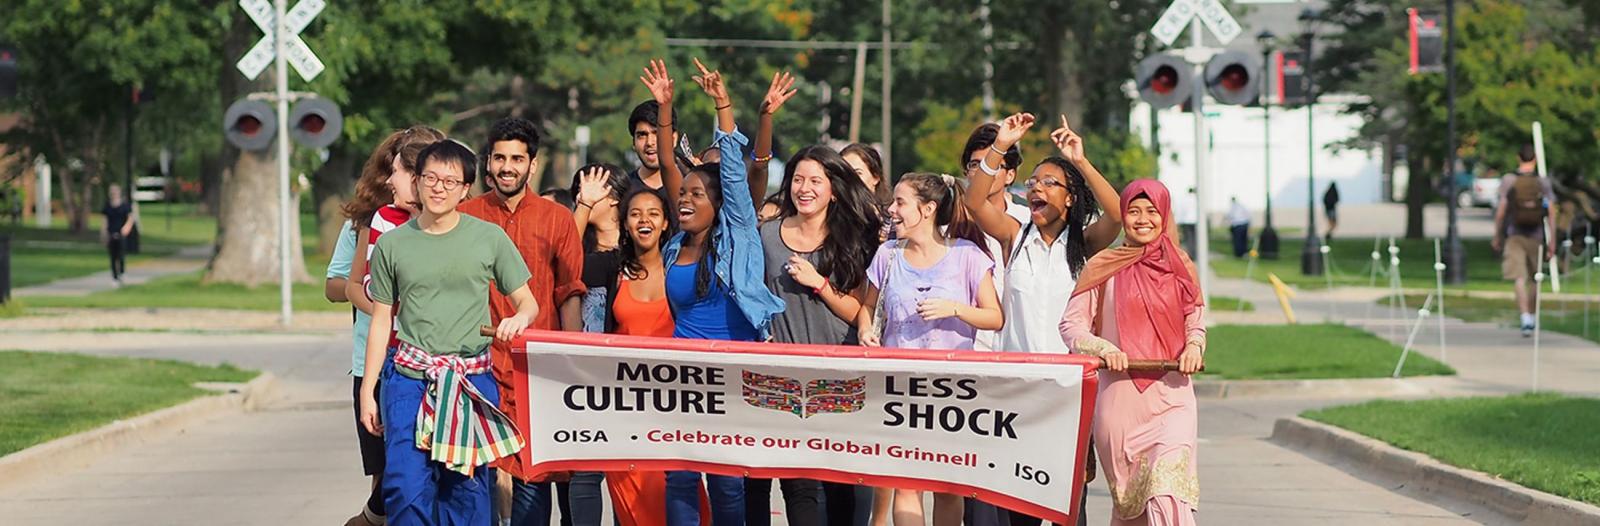 diverse students holding banner that says more culture, less shock, celebrate our global Grinnell, OISA, ISO 